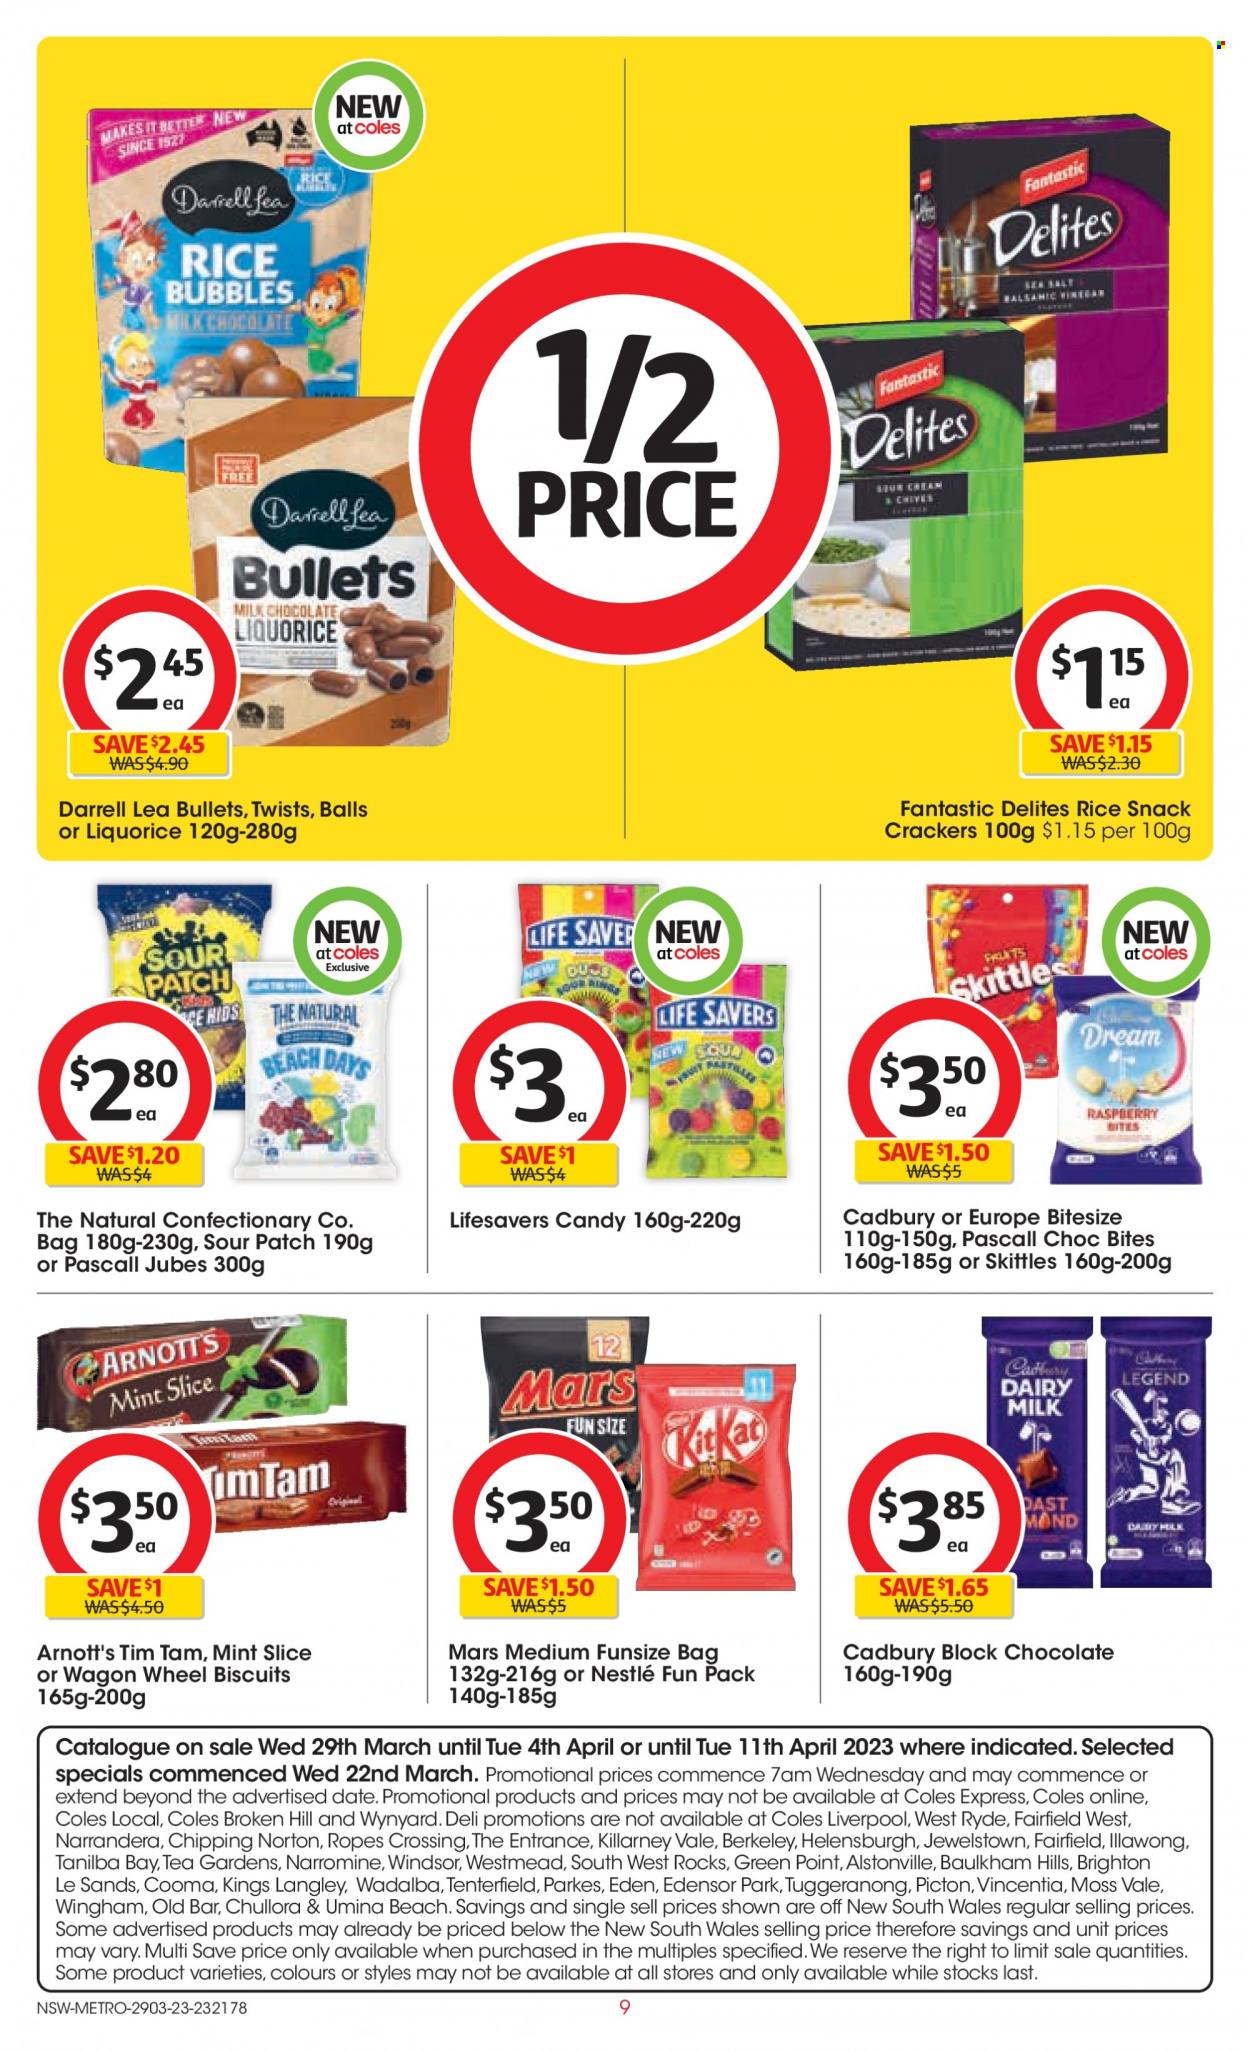 thumbnail - Coles Catalogue - 29 Mar 2023 - 4 Apr 2023 - Sales products - chives, milk chocolate, Nestlé, chocolate, snack, Mars, KitKat, crackers, Tim Tam, biscuit, Cadbury, Dairy Milk, Skittles, Sour Patch, Candy, tea, Hill's. Page 9.